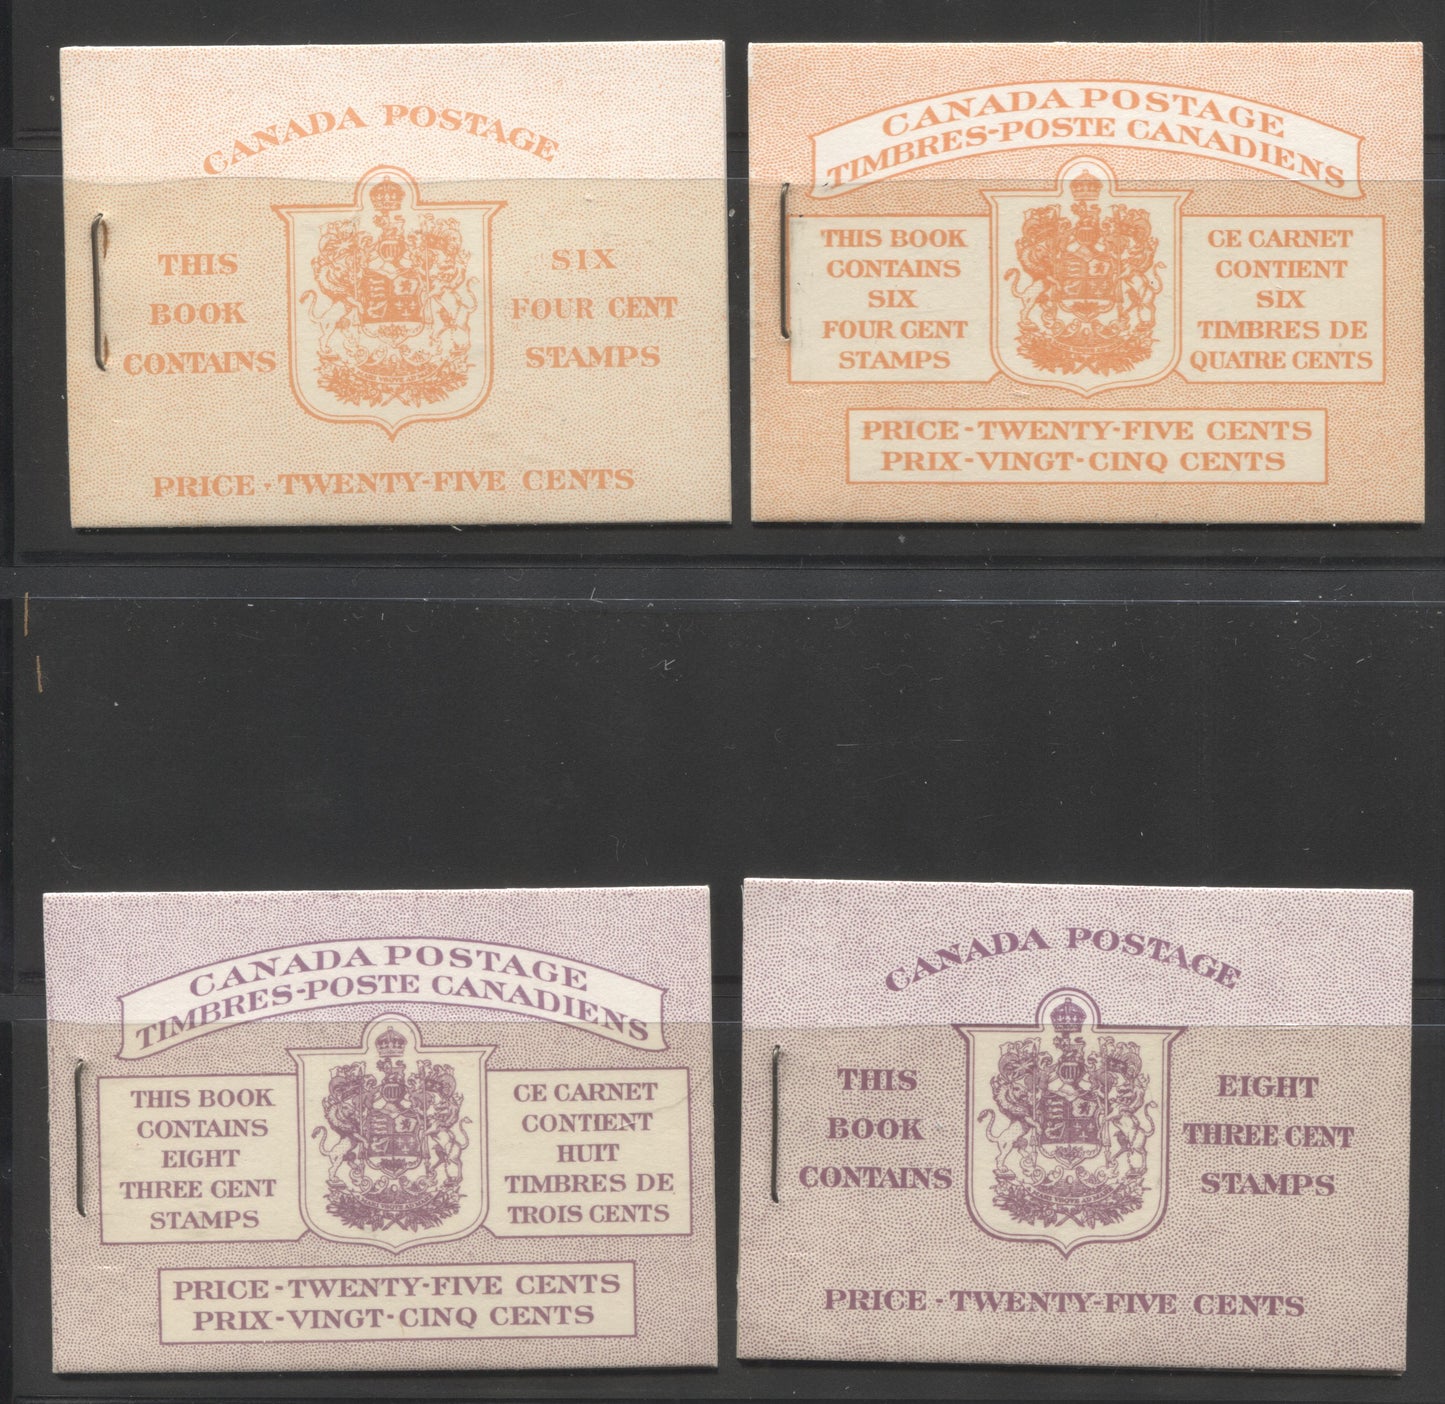 Lot 362 Canada #BK45-BK46 1953-1954 Karsh Issue Complete 25c English and Bilingual, Booklets Containing 2 Panes of 4 + 2 Labels of the 3c and 1 Pane of 6 4c, Different Harris Front and Back Covers